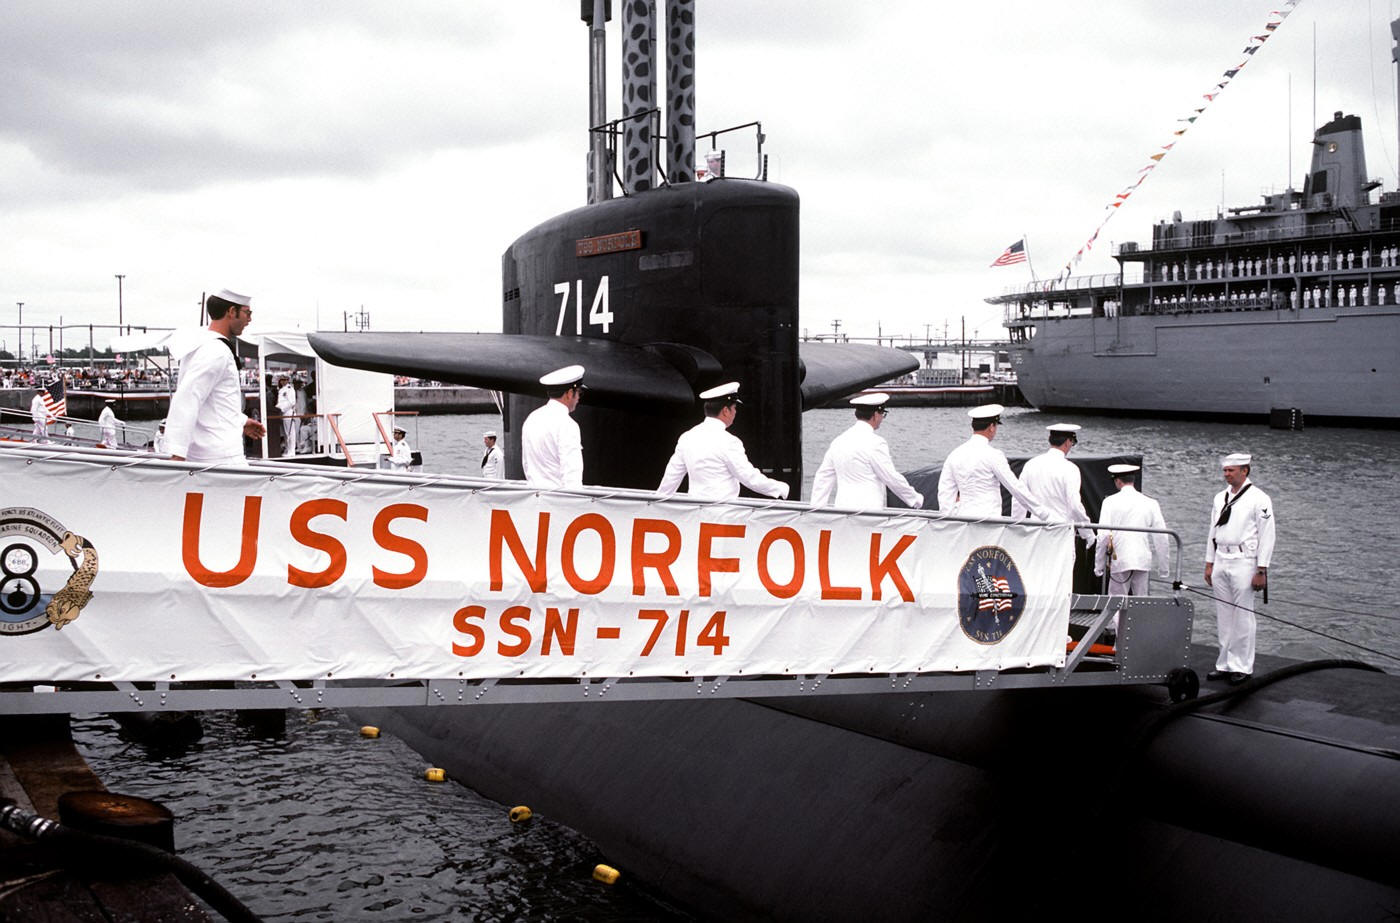 ssn-714 uss norfolk commissioning ceremony may 1983